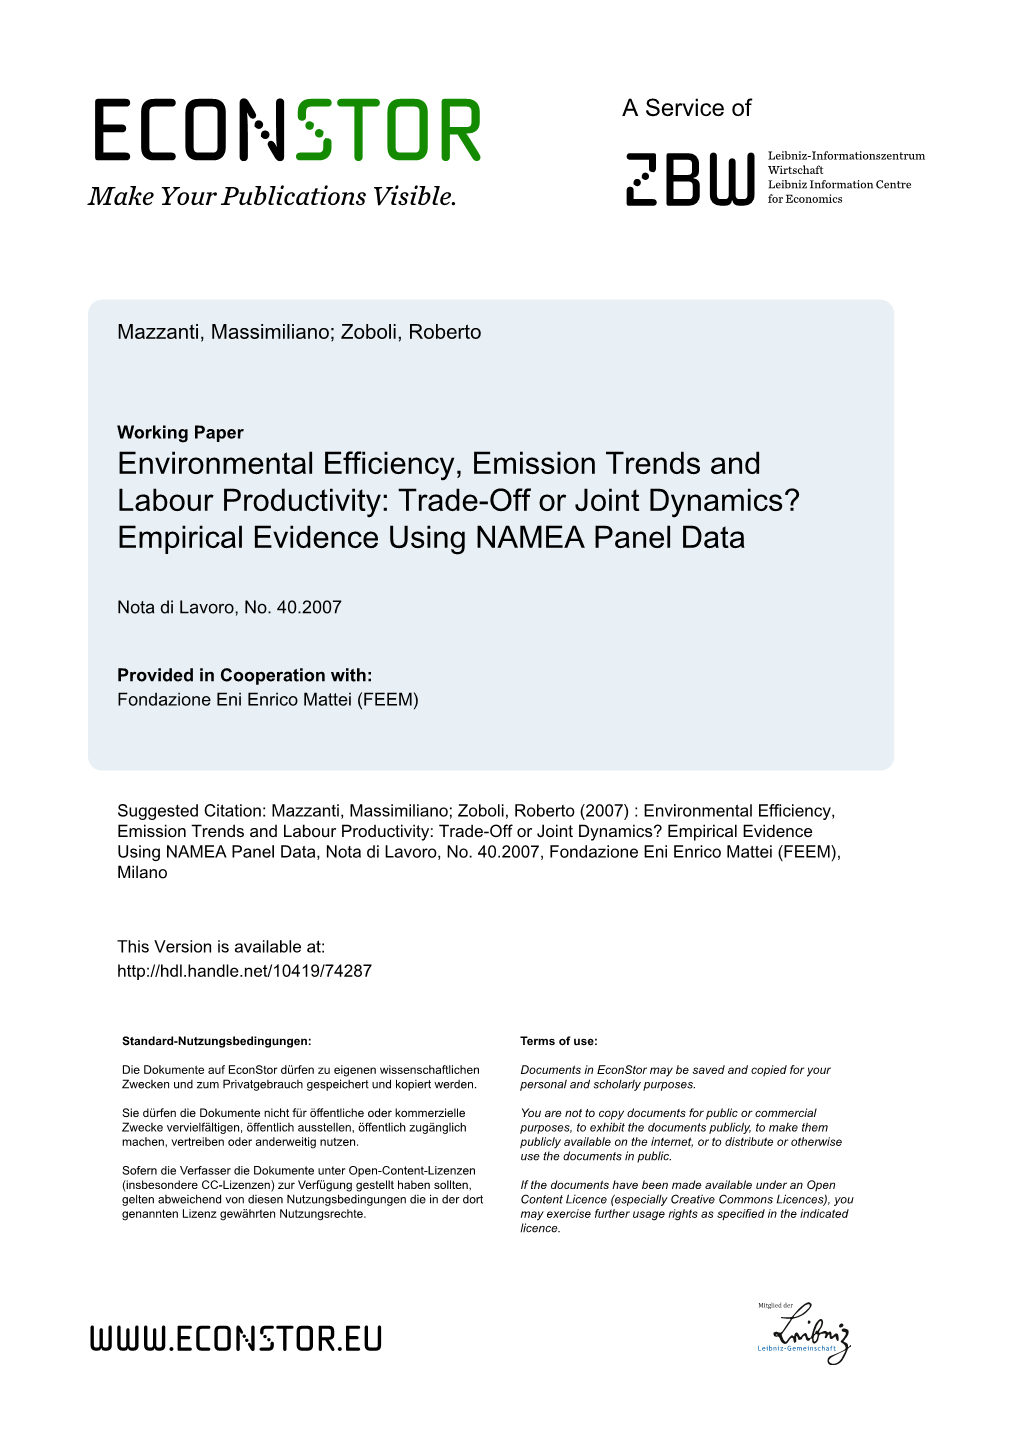 Environmental Efficiency, Emission Trends and Labour Productivity: Trade-Off Or Joint Dynamics? Empirical Evidence Using NAMEA Panel Data